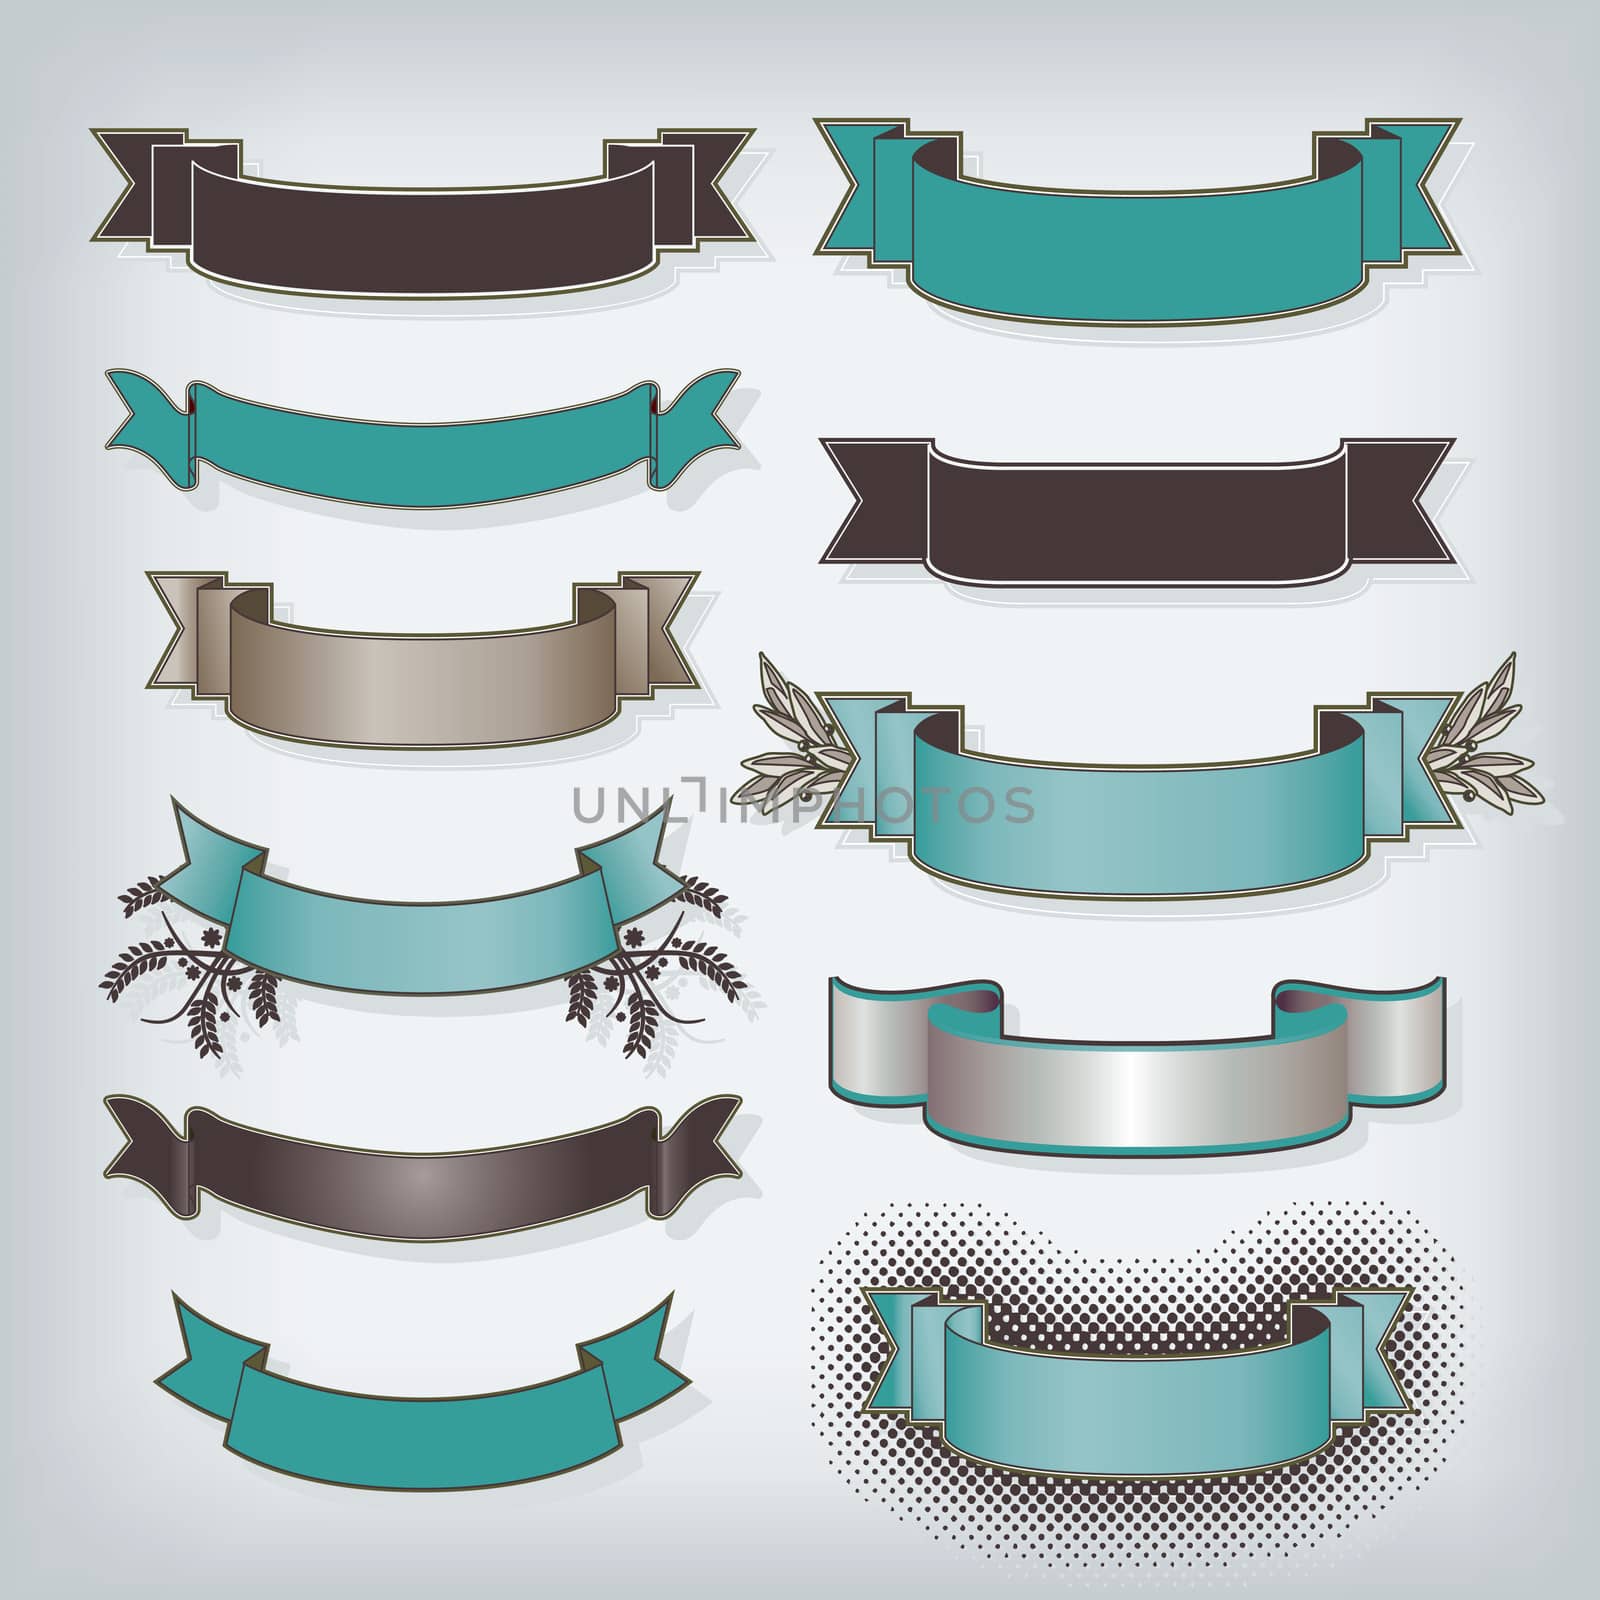 Eleven Banners in Teal with space for your text